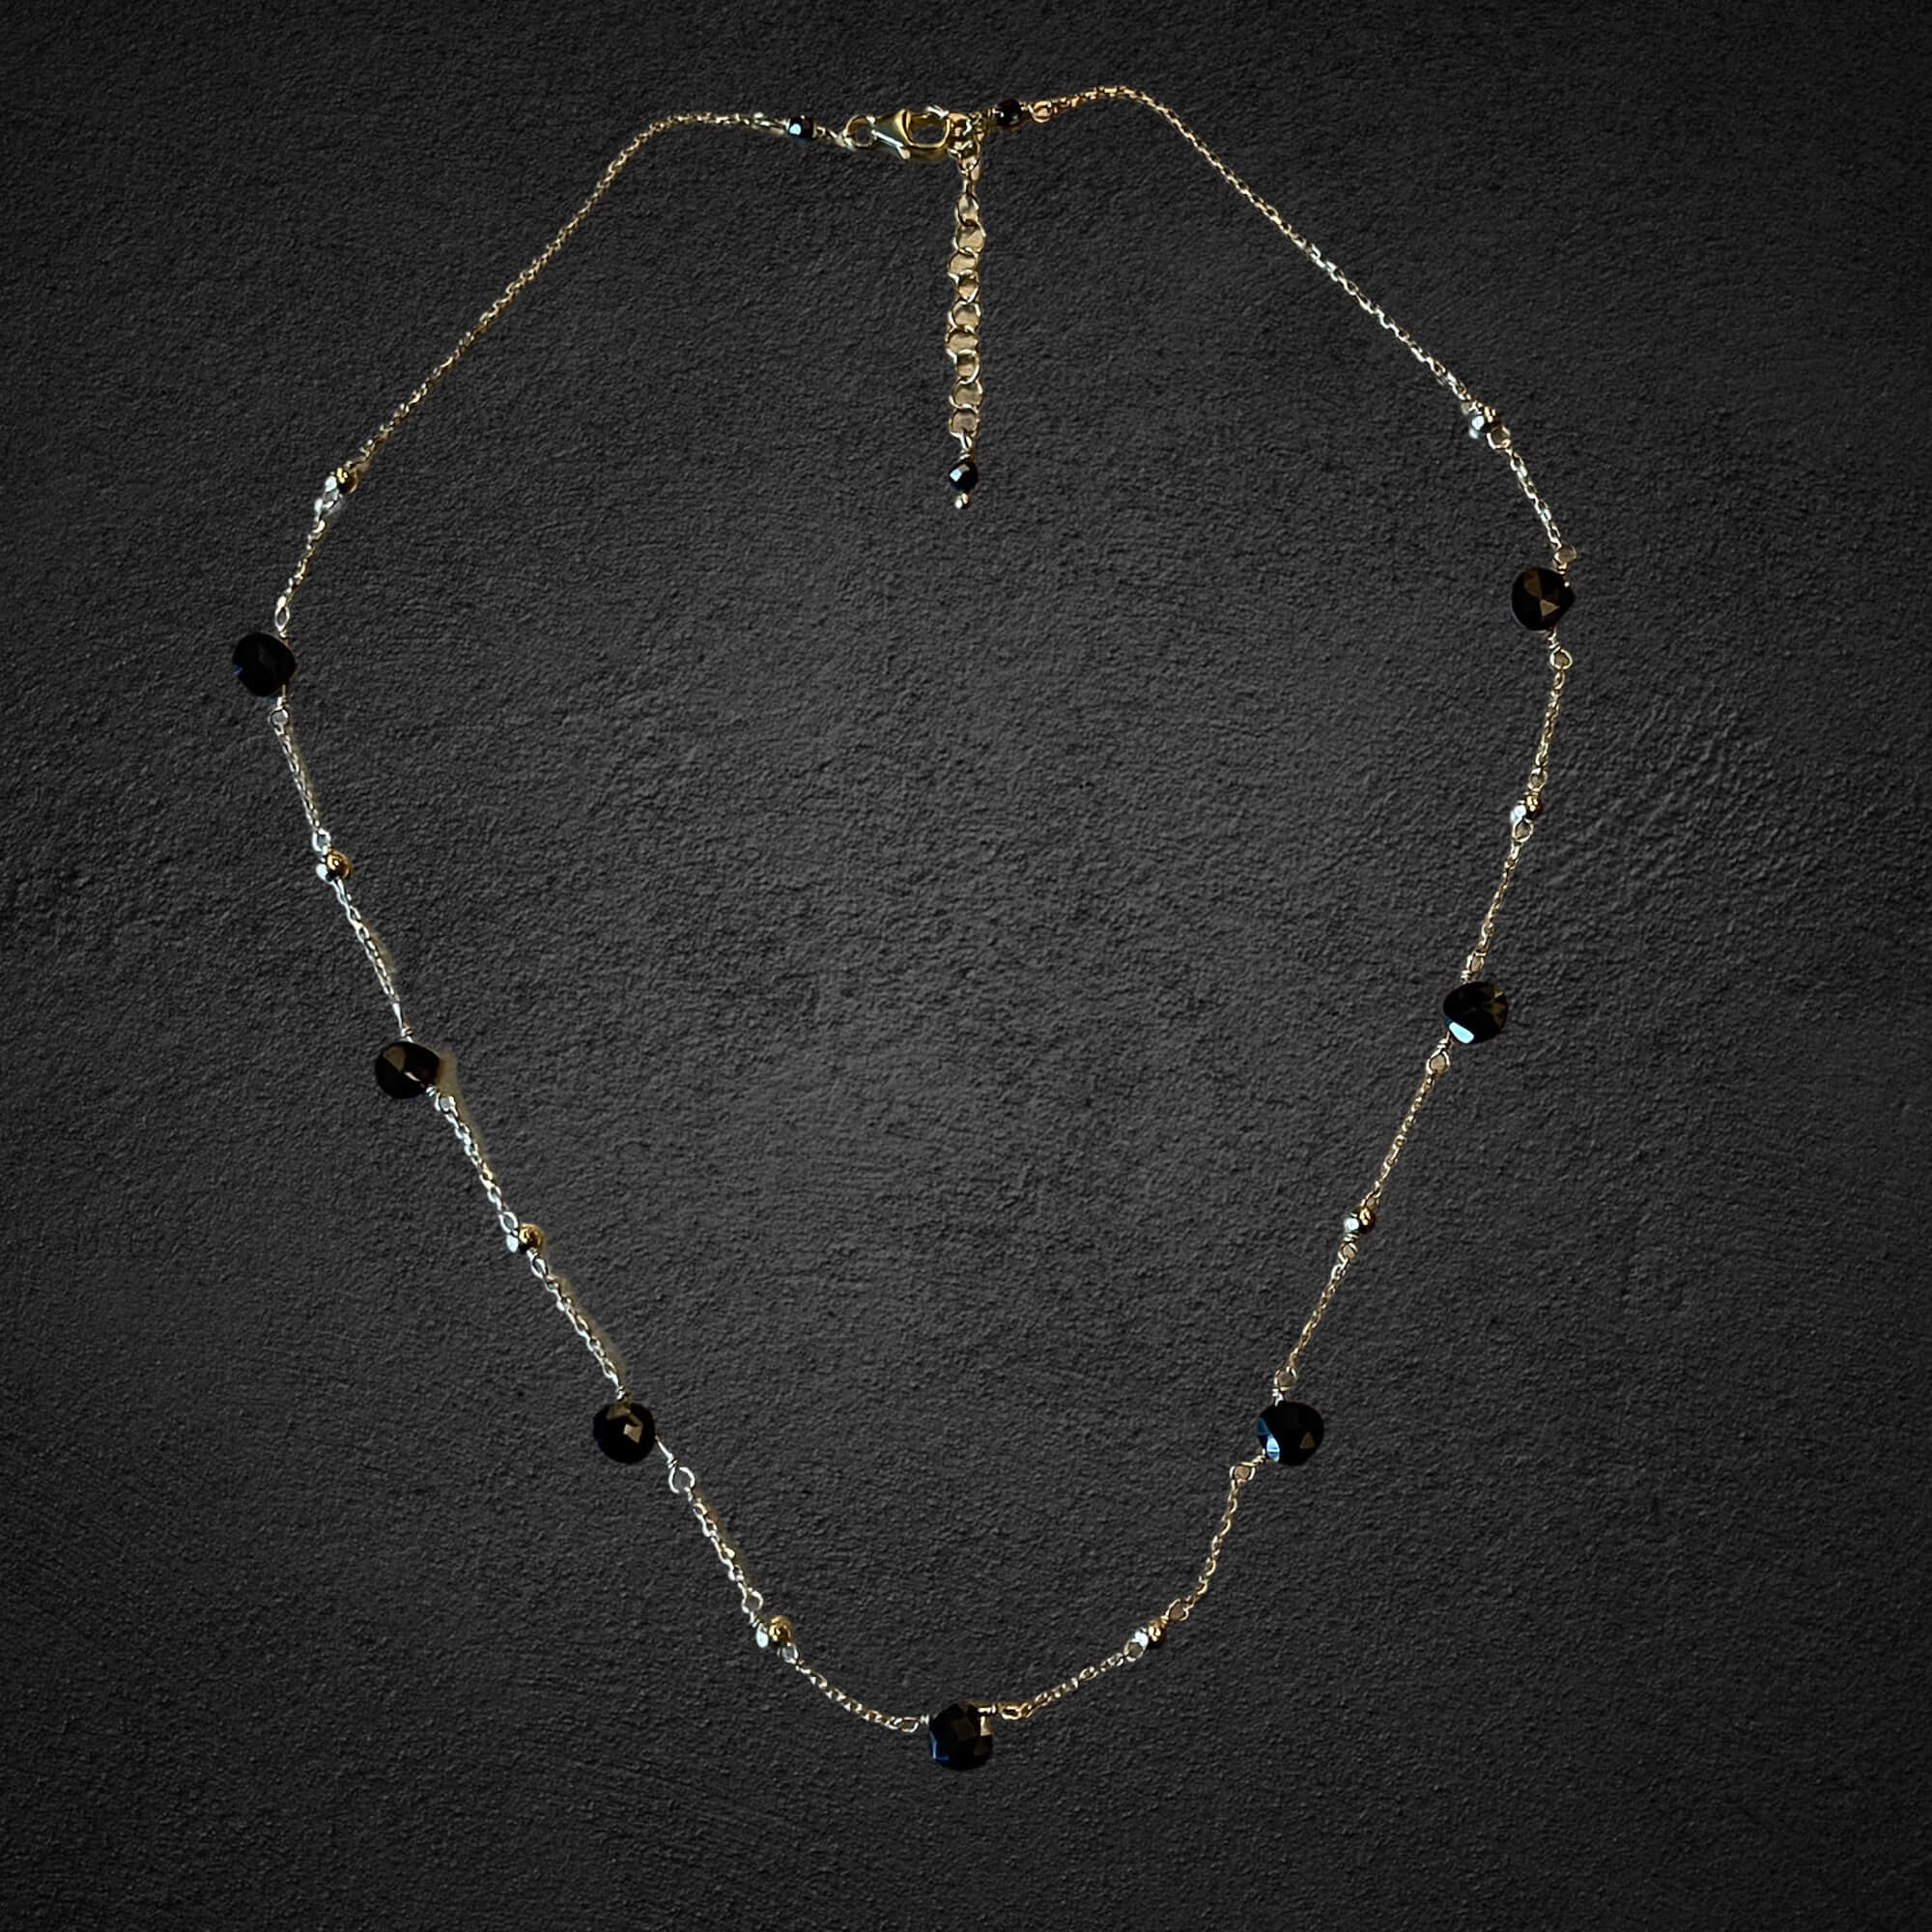 Gold-plated necklace with Onyx stones